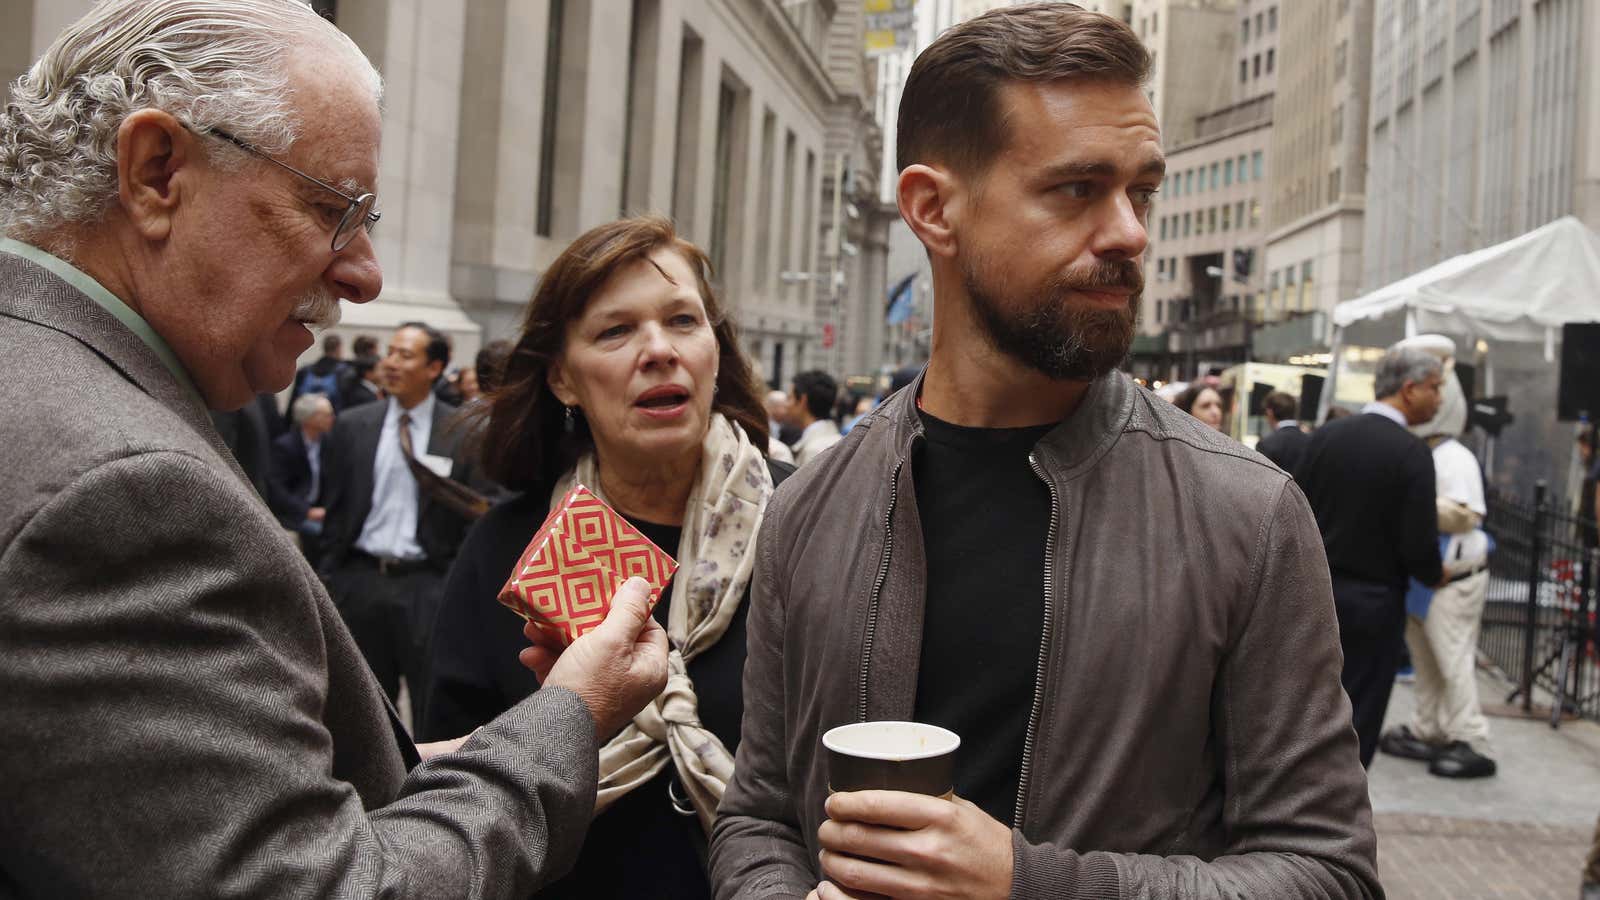 Jack Dorsey is all, “Where did everyone go?”